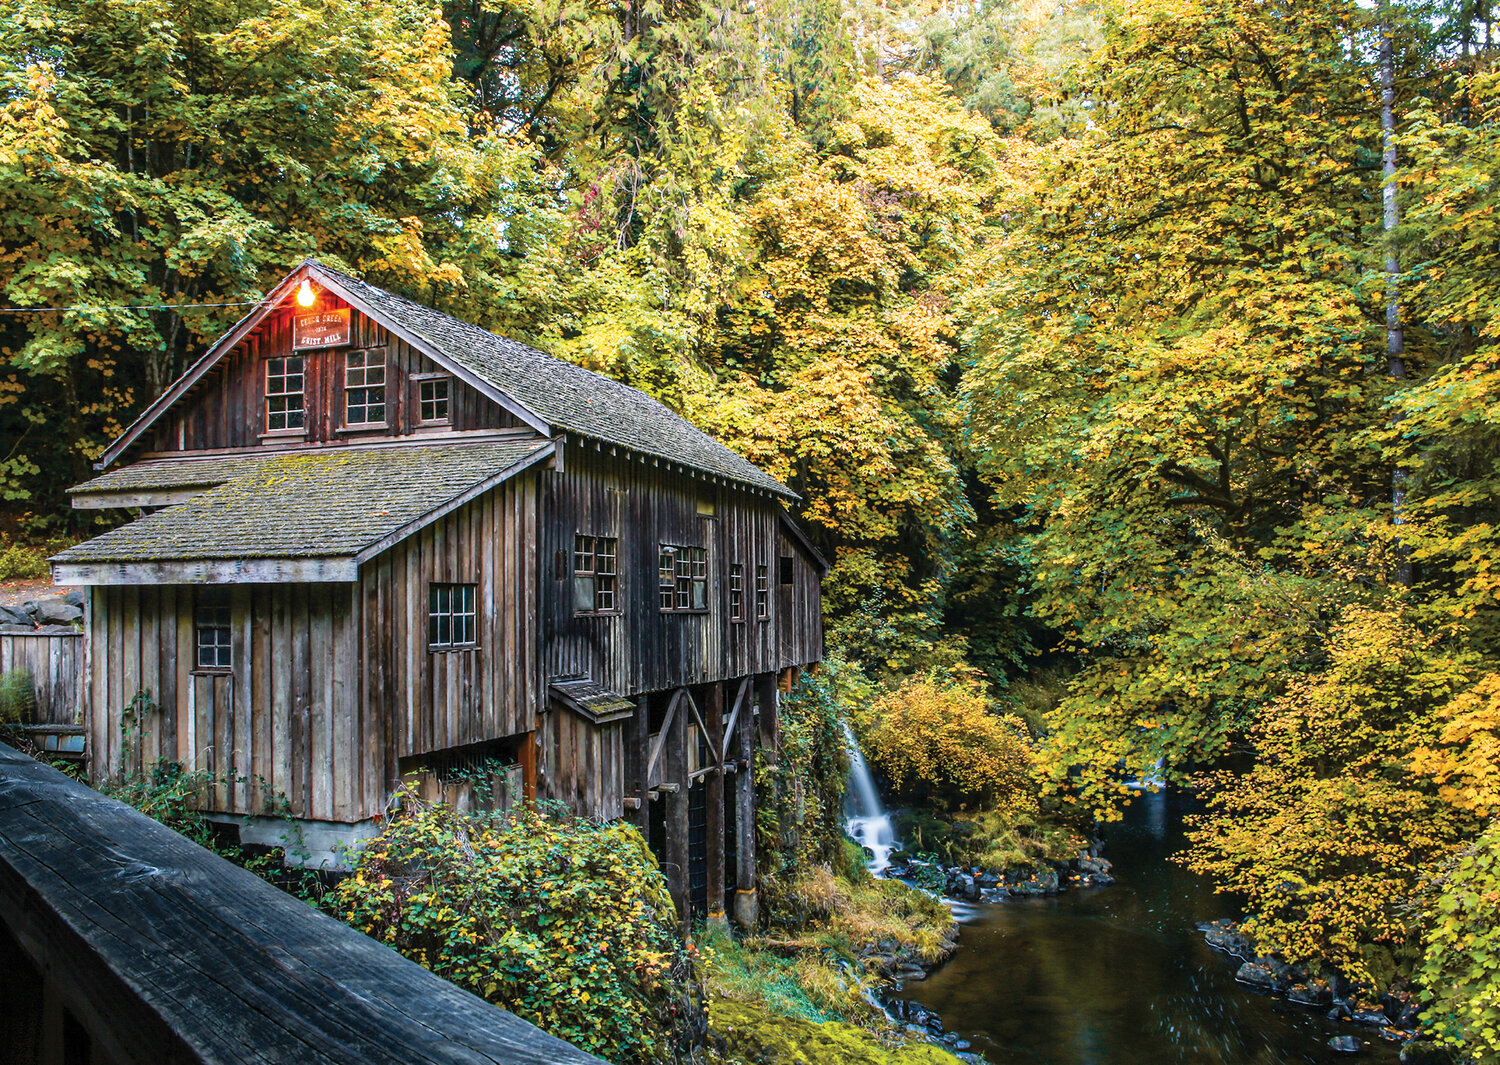 Right in North Clark County’s backyard and just a 24-minute drive from The Reflector’s Battle Ground office, the Cedar Creek Grist Mill is pictured as summer turns to fall.